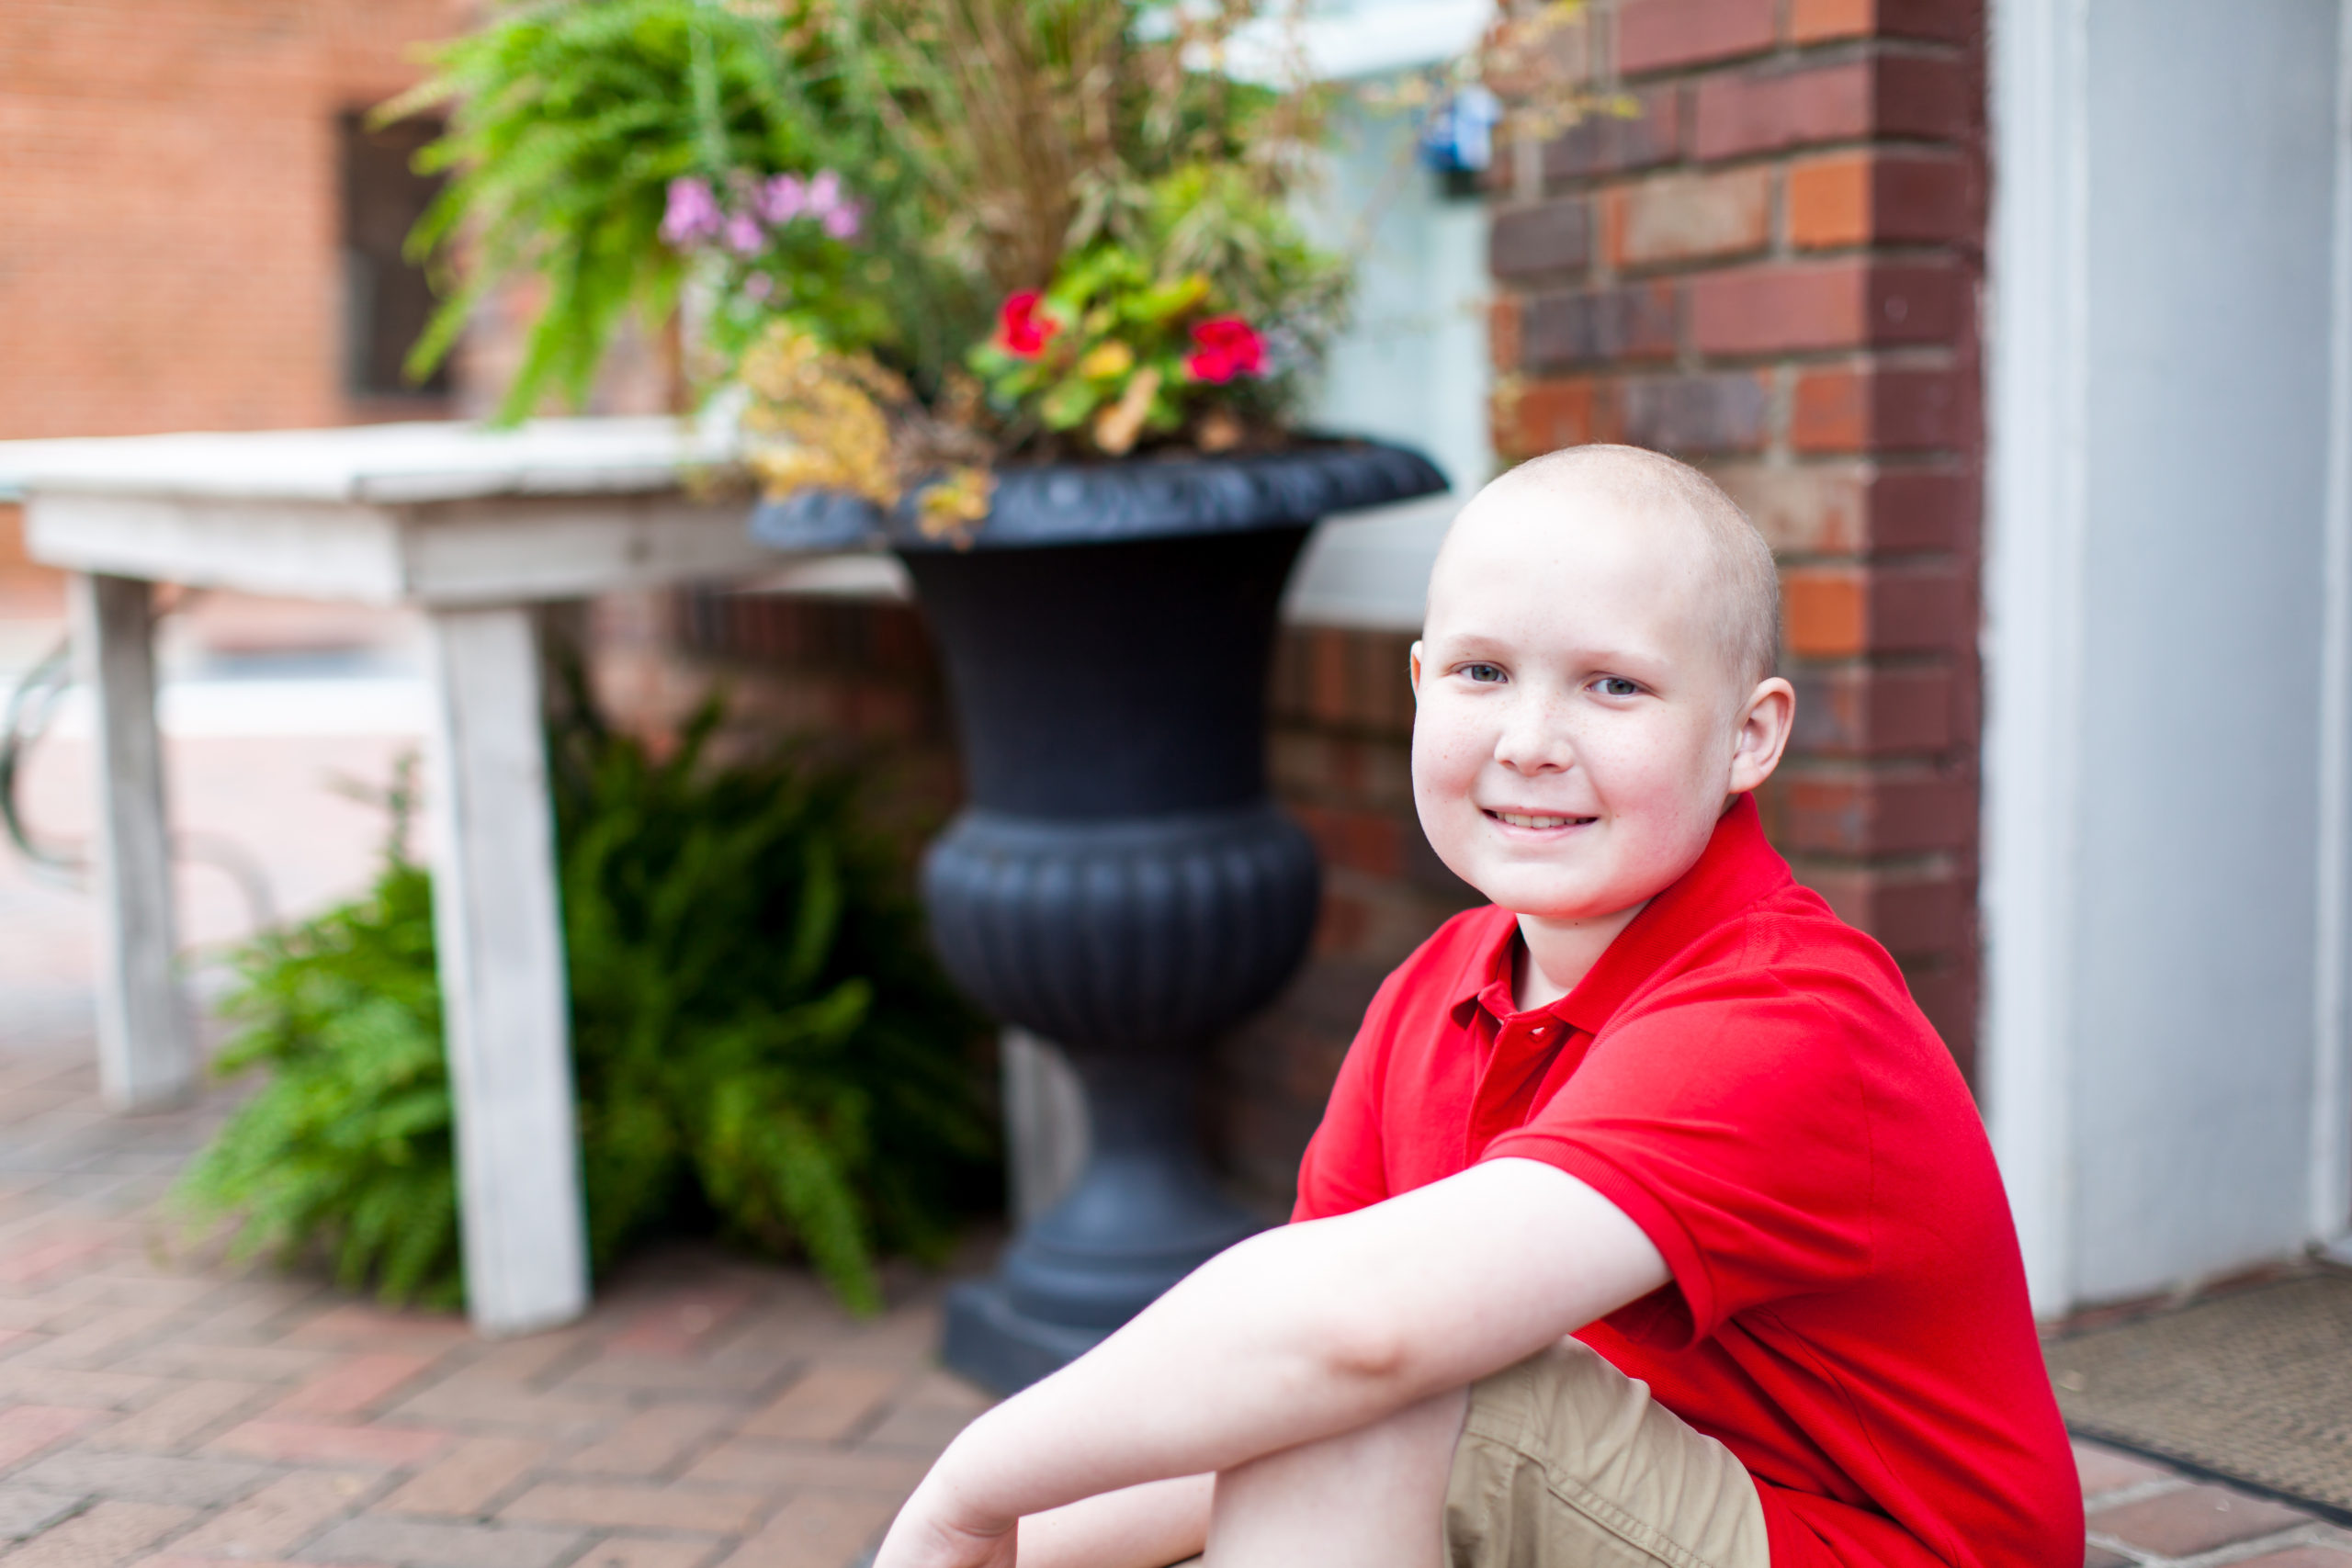 Ethan, 13 years old and fighting blood cancer